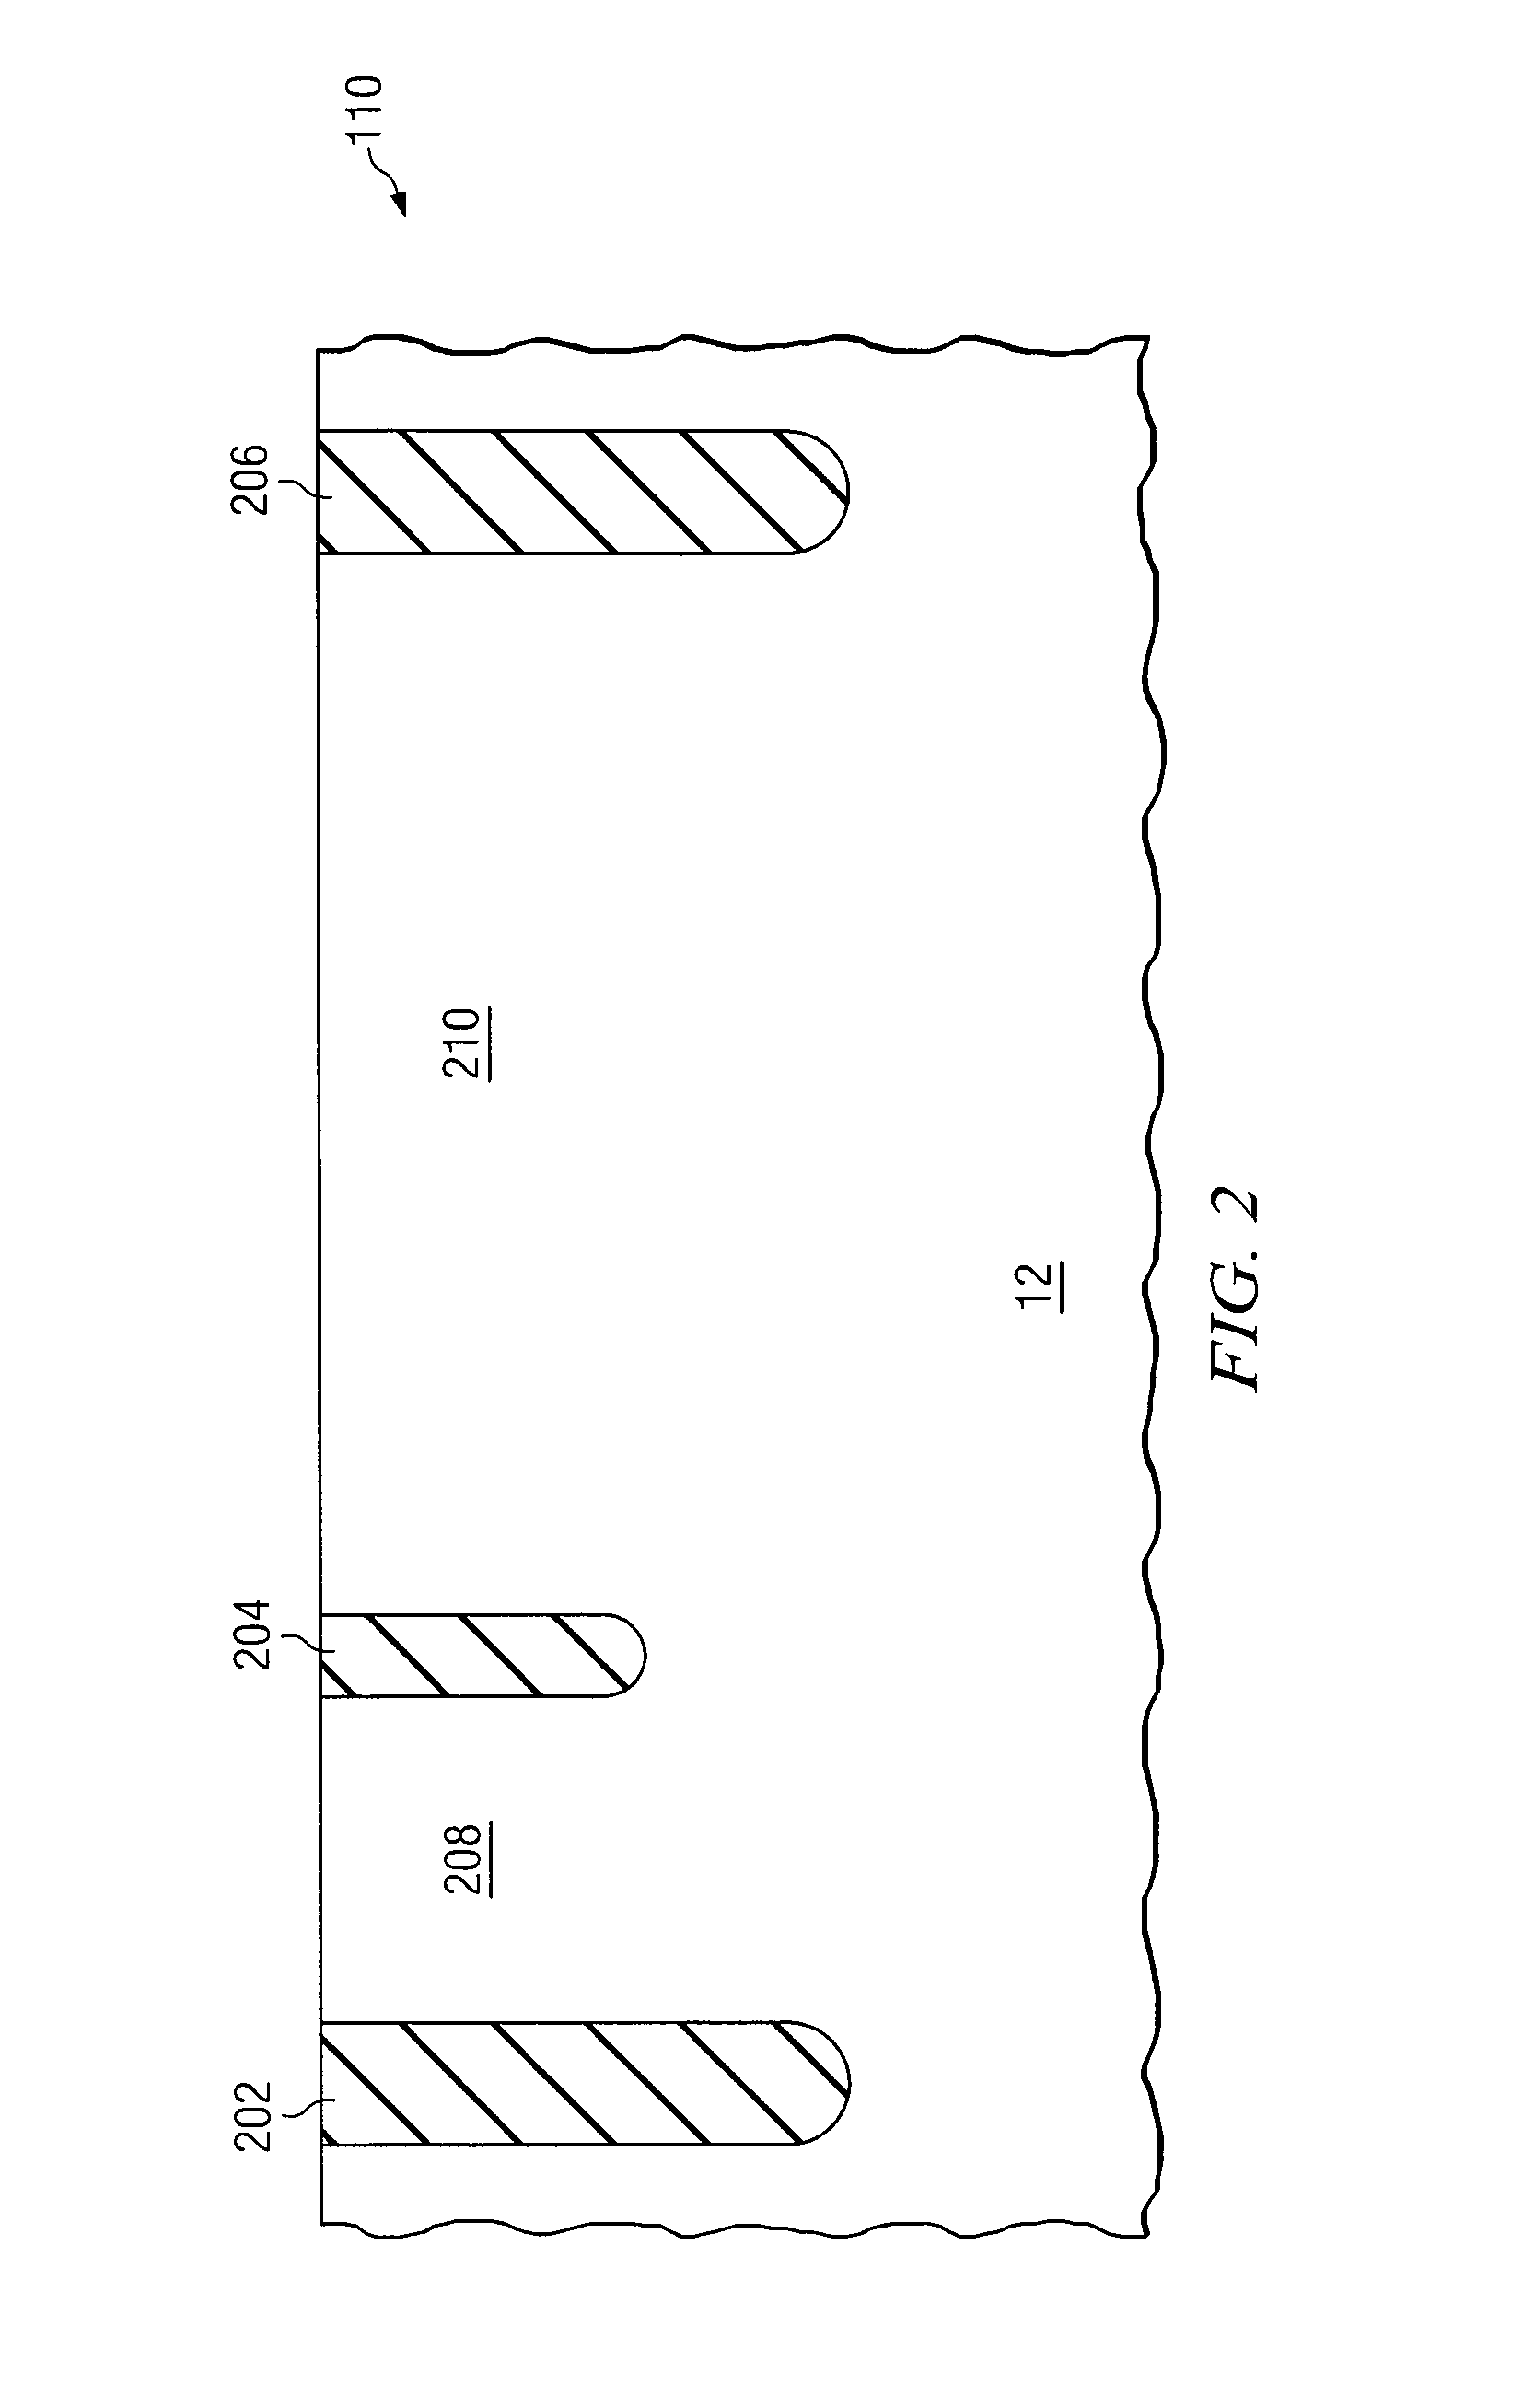 Method for applying a stress layer to a semiconductor device and device formed therefrom